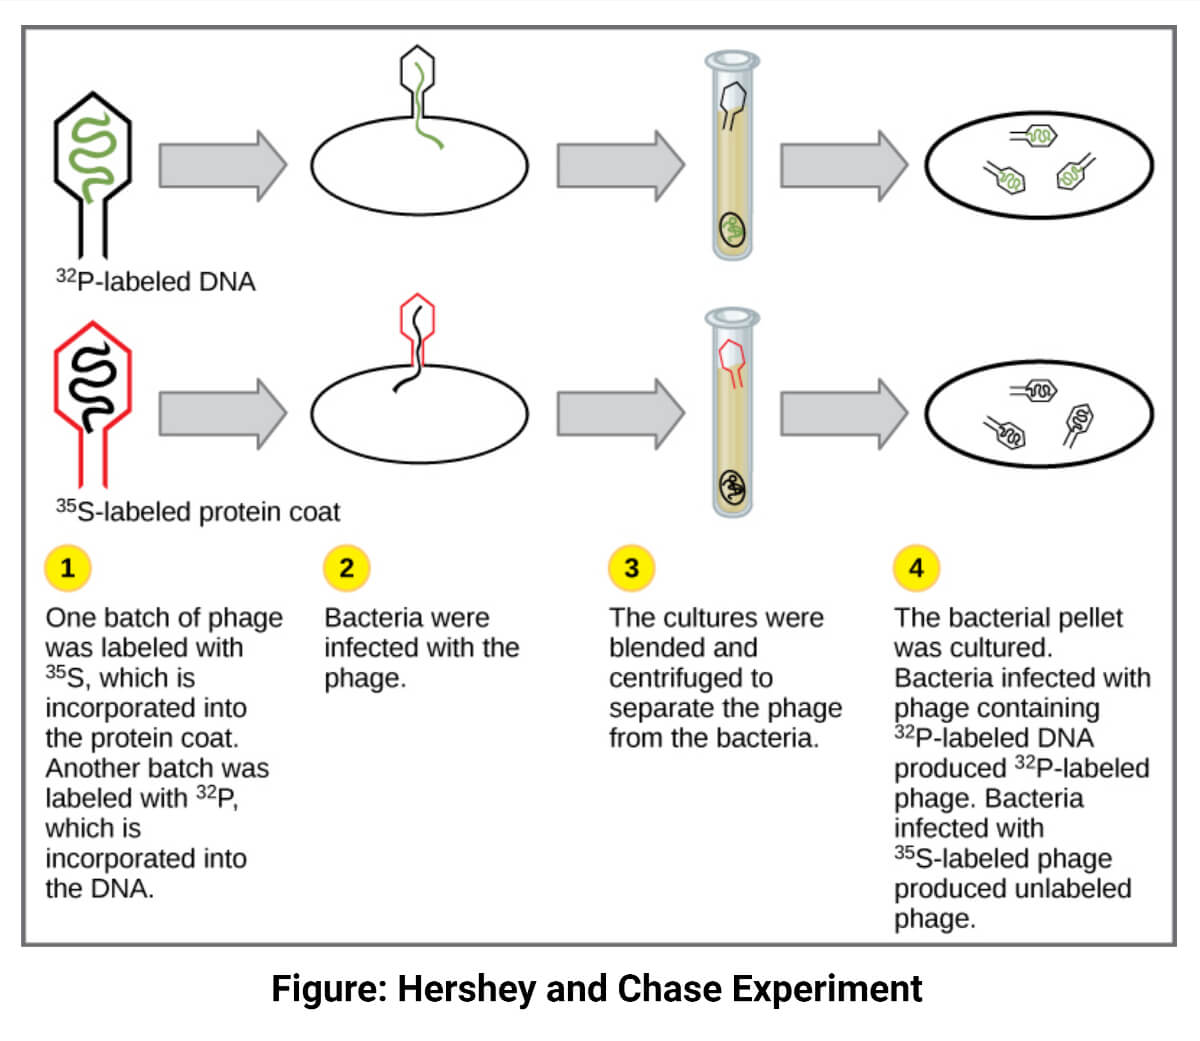 Hershey and Chase Experiment